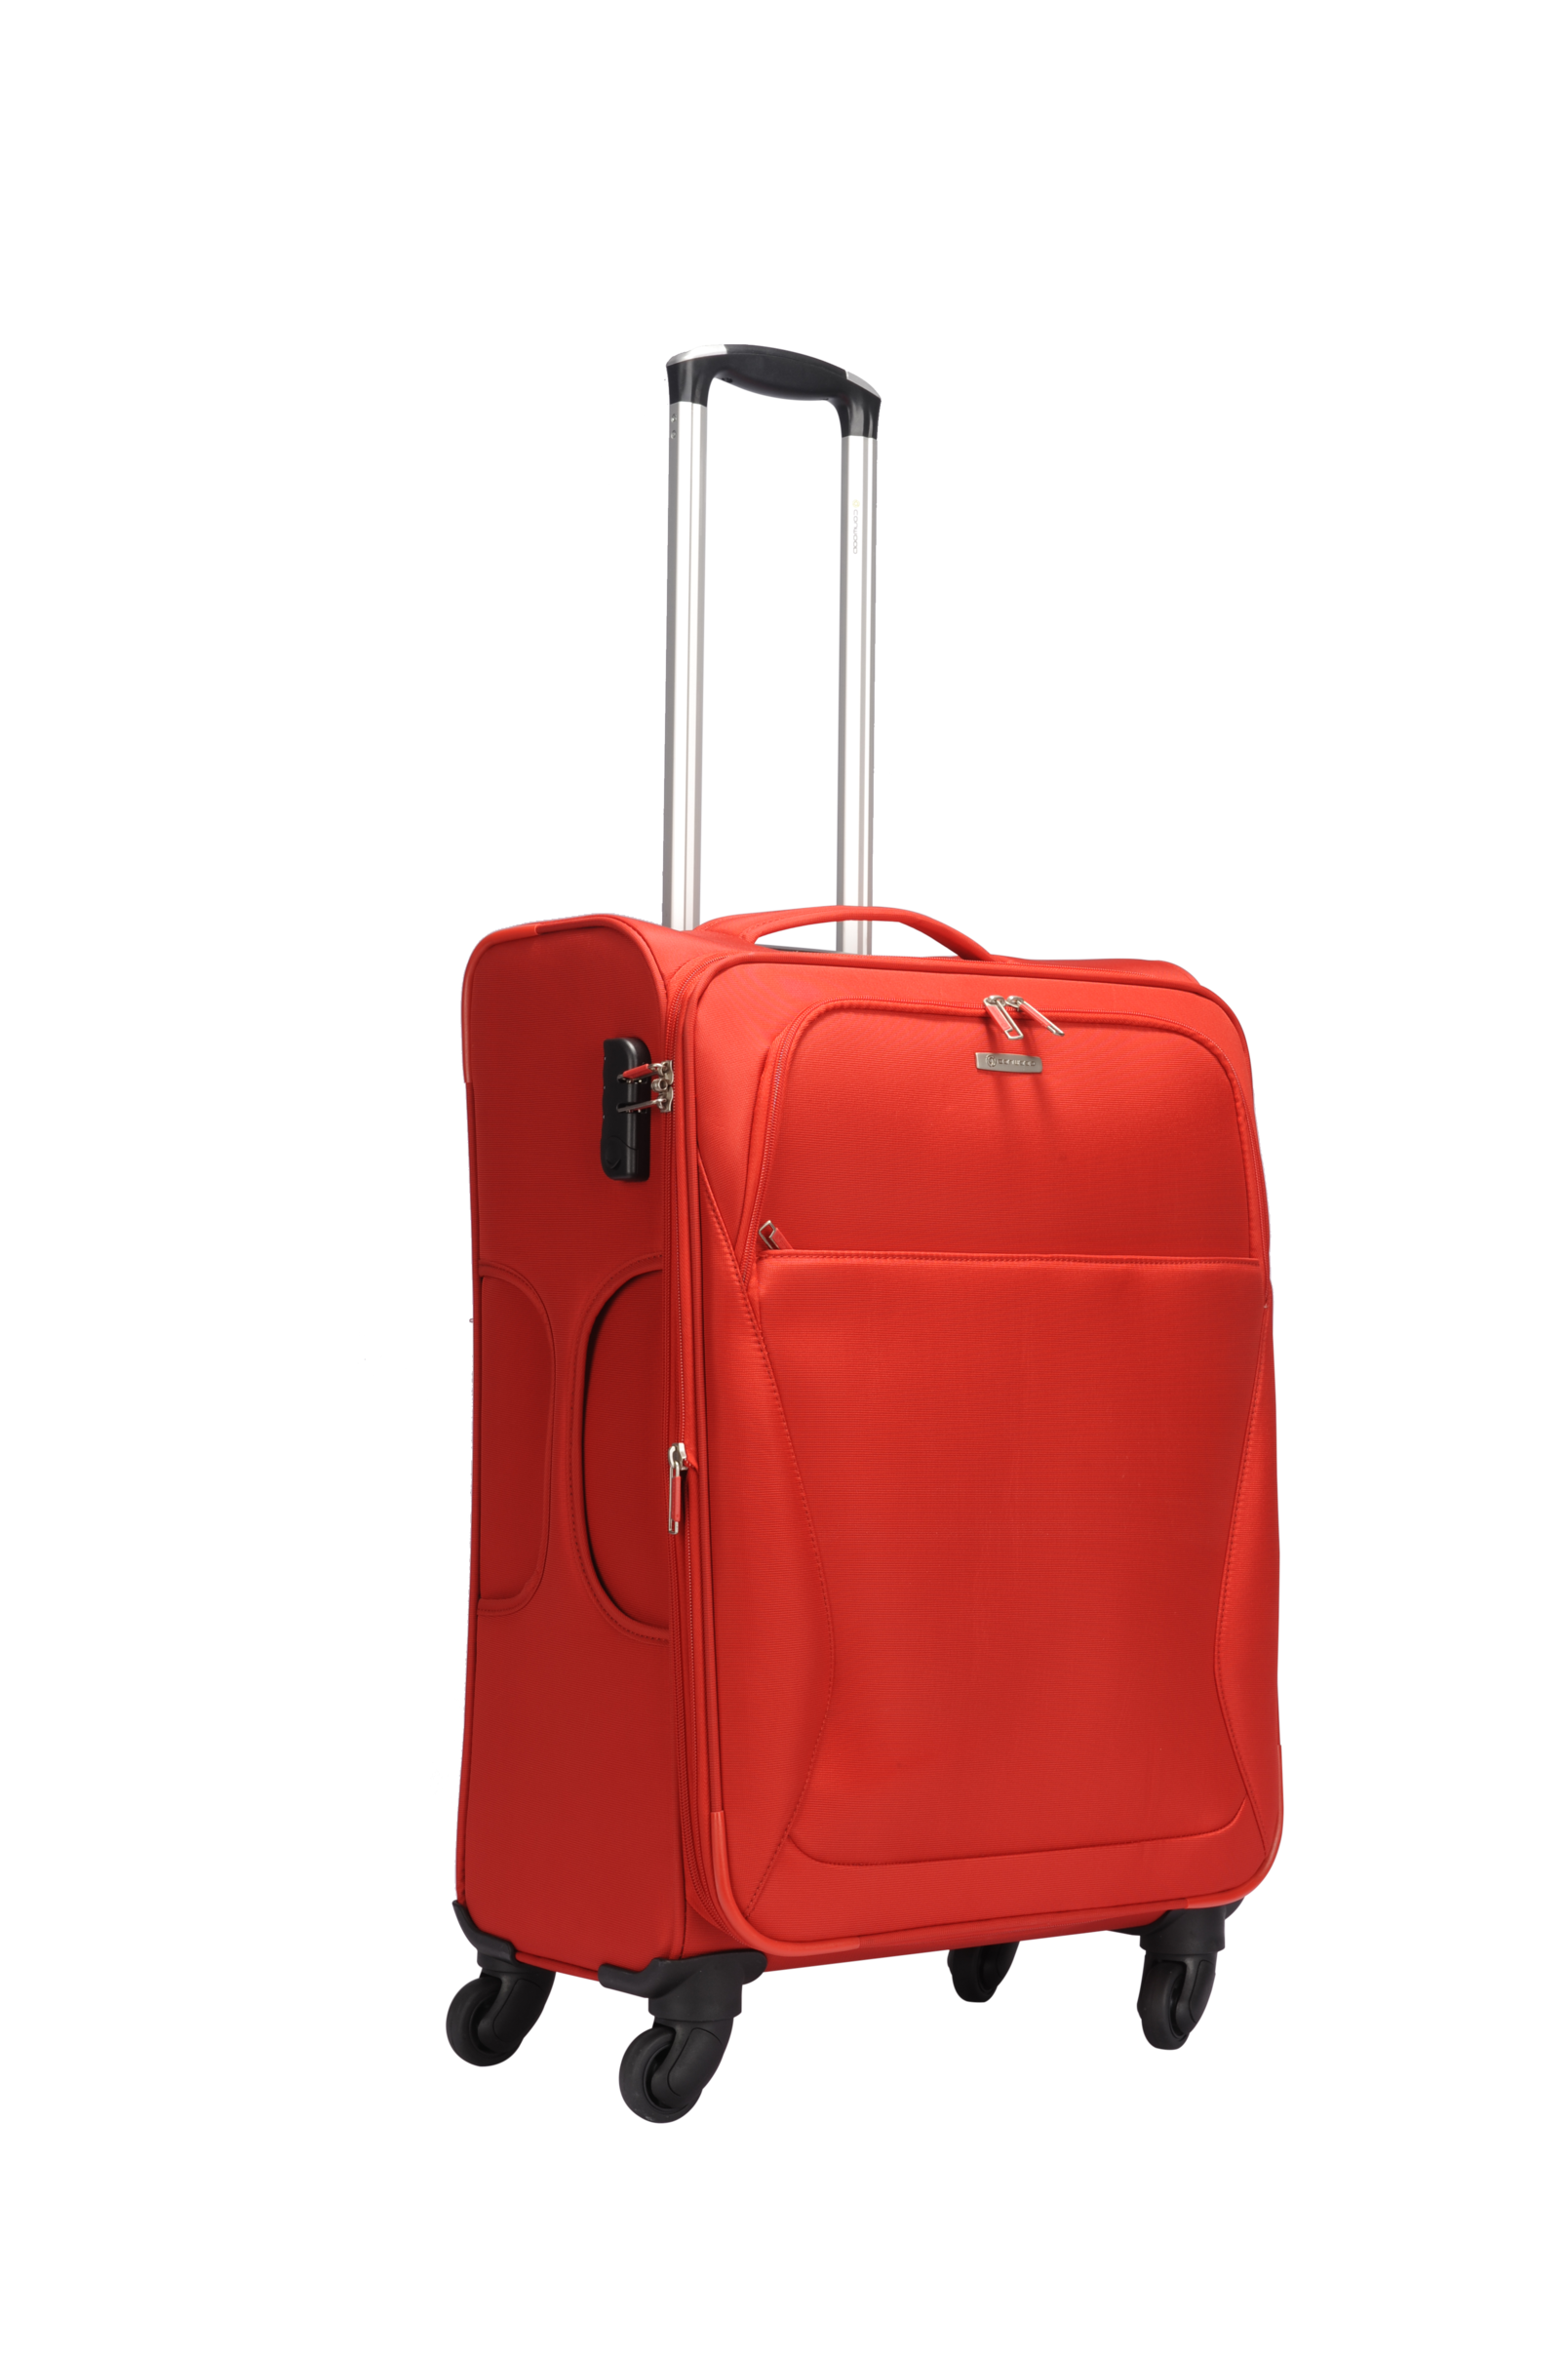 Red Luggage Suitcase PNG HD File